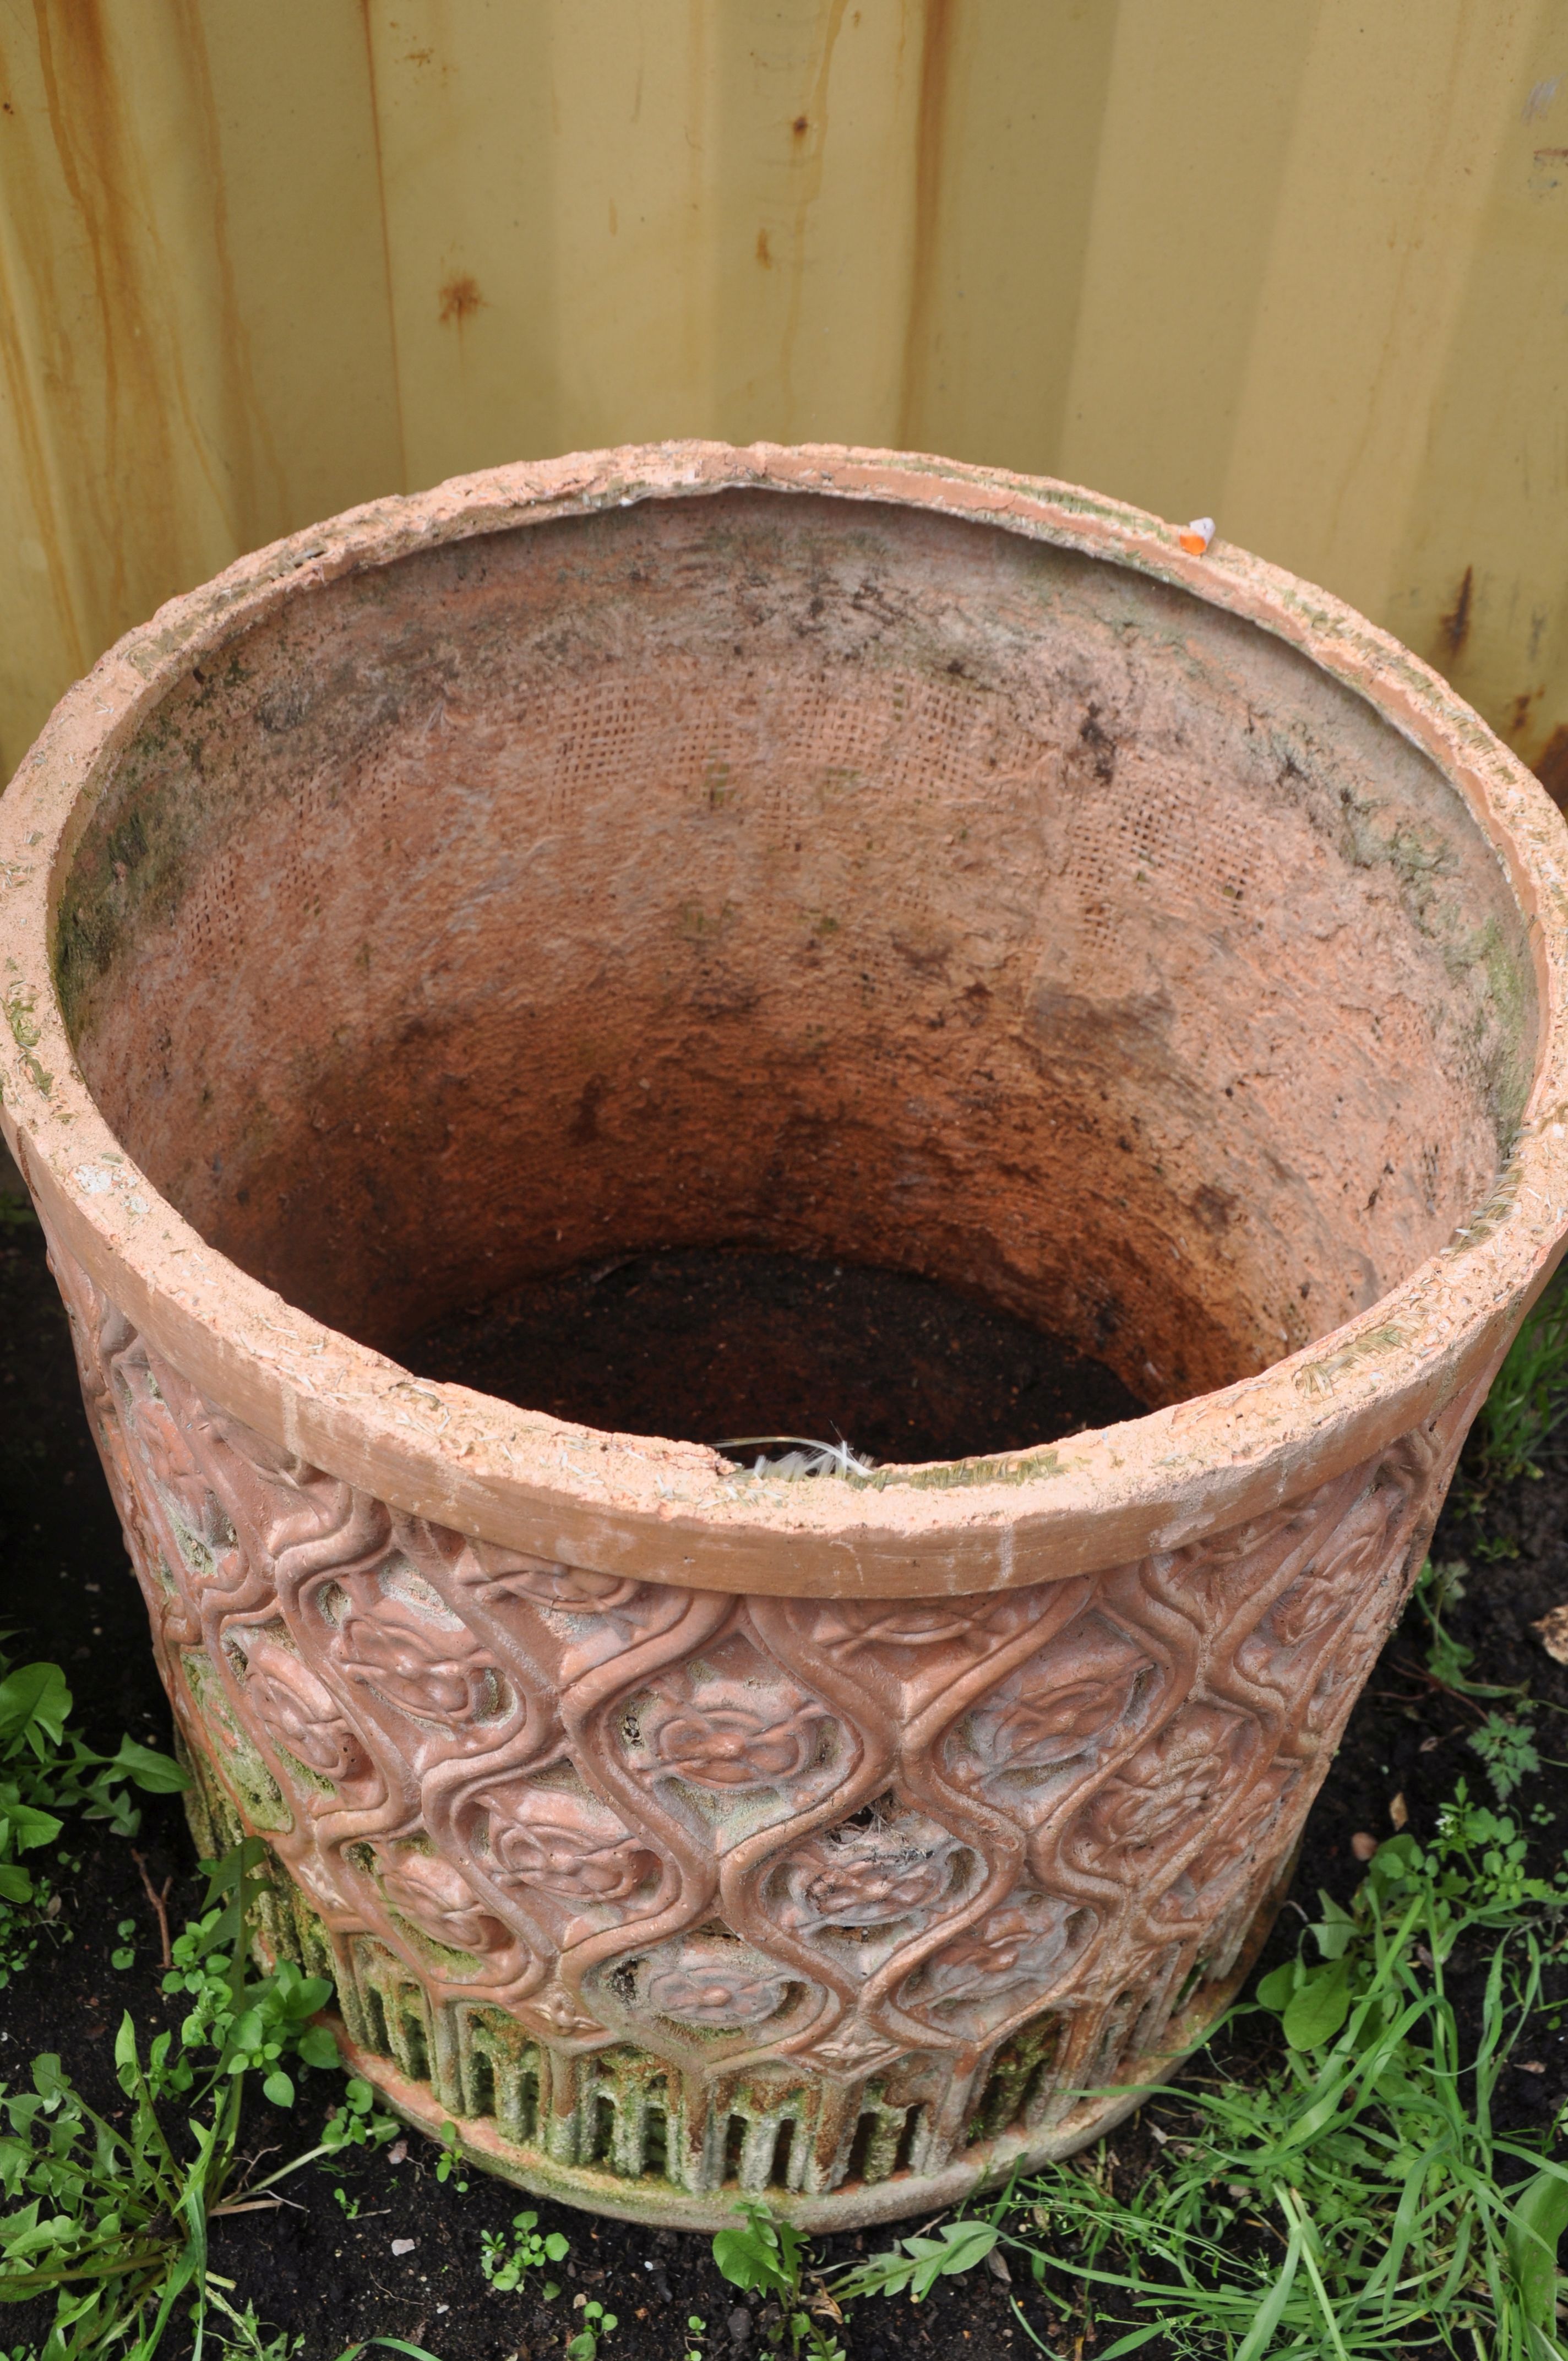 A SELECTION OF WEATHERED TERRACOTTA POTS comprising three circular terracotta pots and a smaller - Image 4 of 4